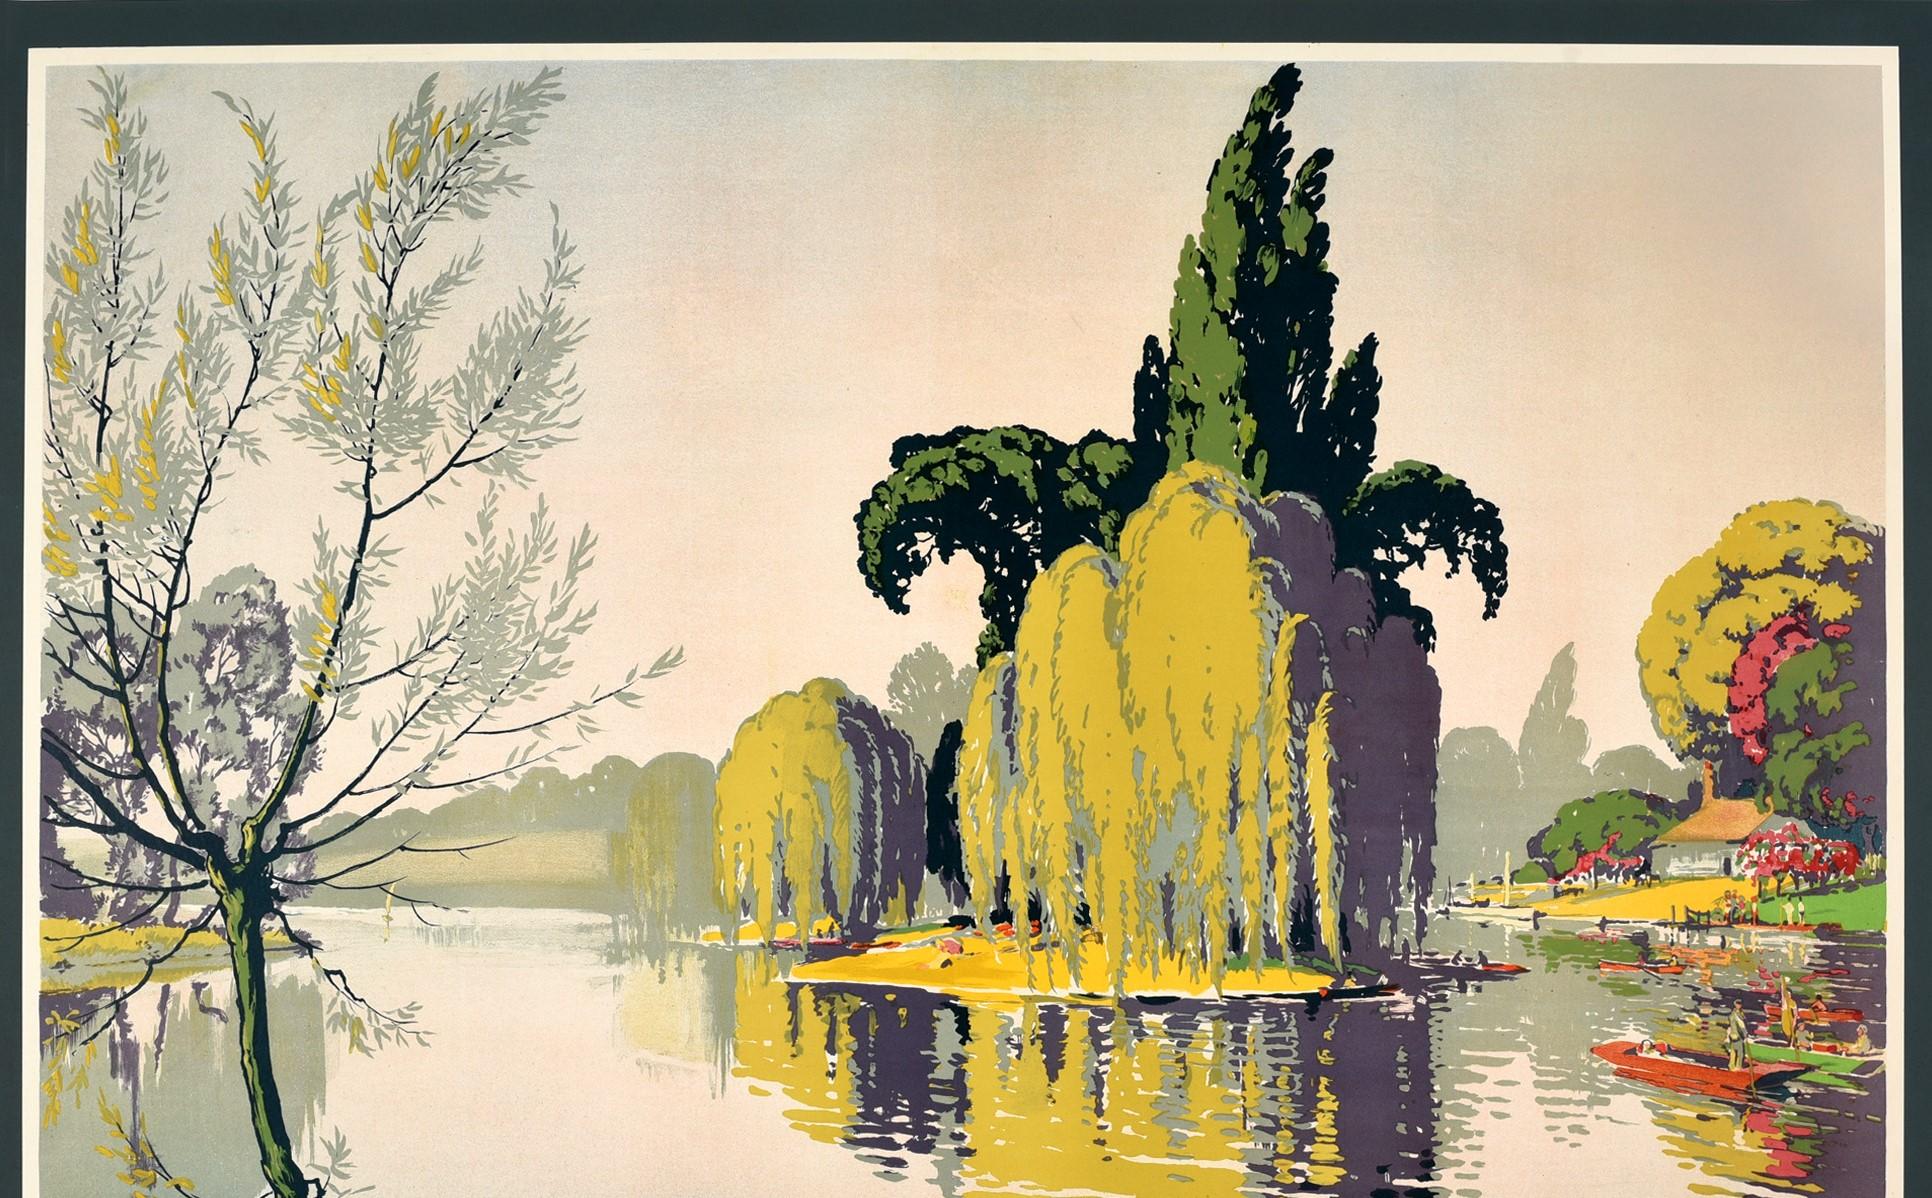 Original vintage GWR Great Western Railway SR Southern Railway poster for the Thames Valley featuring a scenic illustration by Walter E Spradbery (1889-1969) of a tree lined River Thames with people in rowing boats and punting on the calm water and